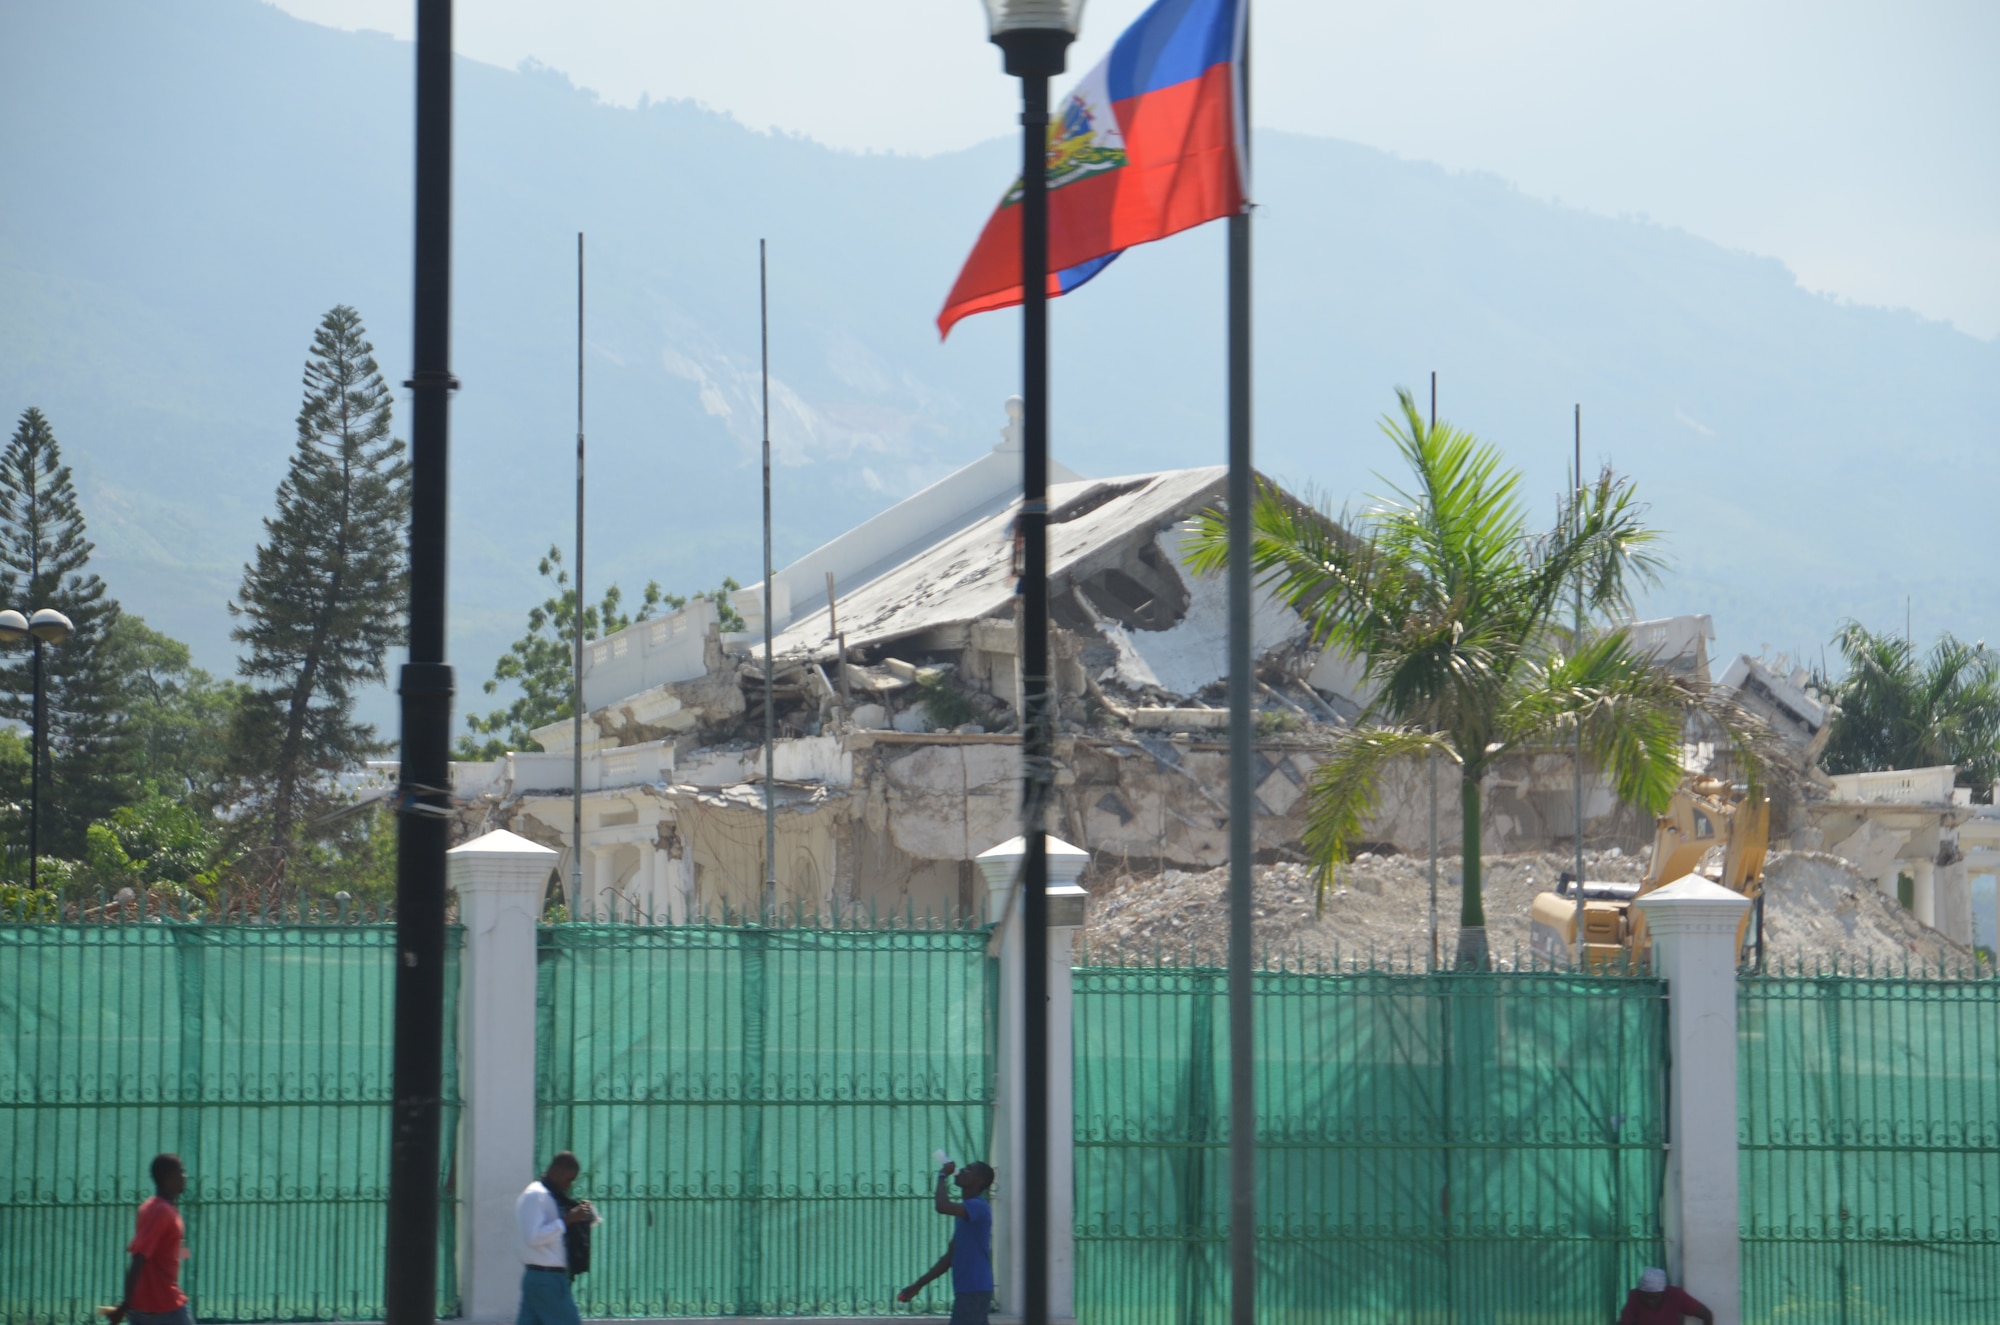 The presidential palace lies in ruins in Port-au-Prince, Haiti, nearly three years after the lethal earthquake – and the relief effort, which the 439th Airlift Wing joined.
(U.S. Air Force photo by Lt. Col. James Bishop)
